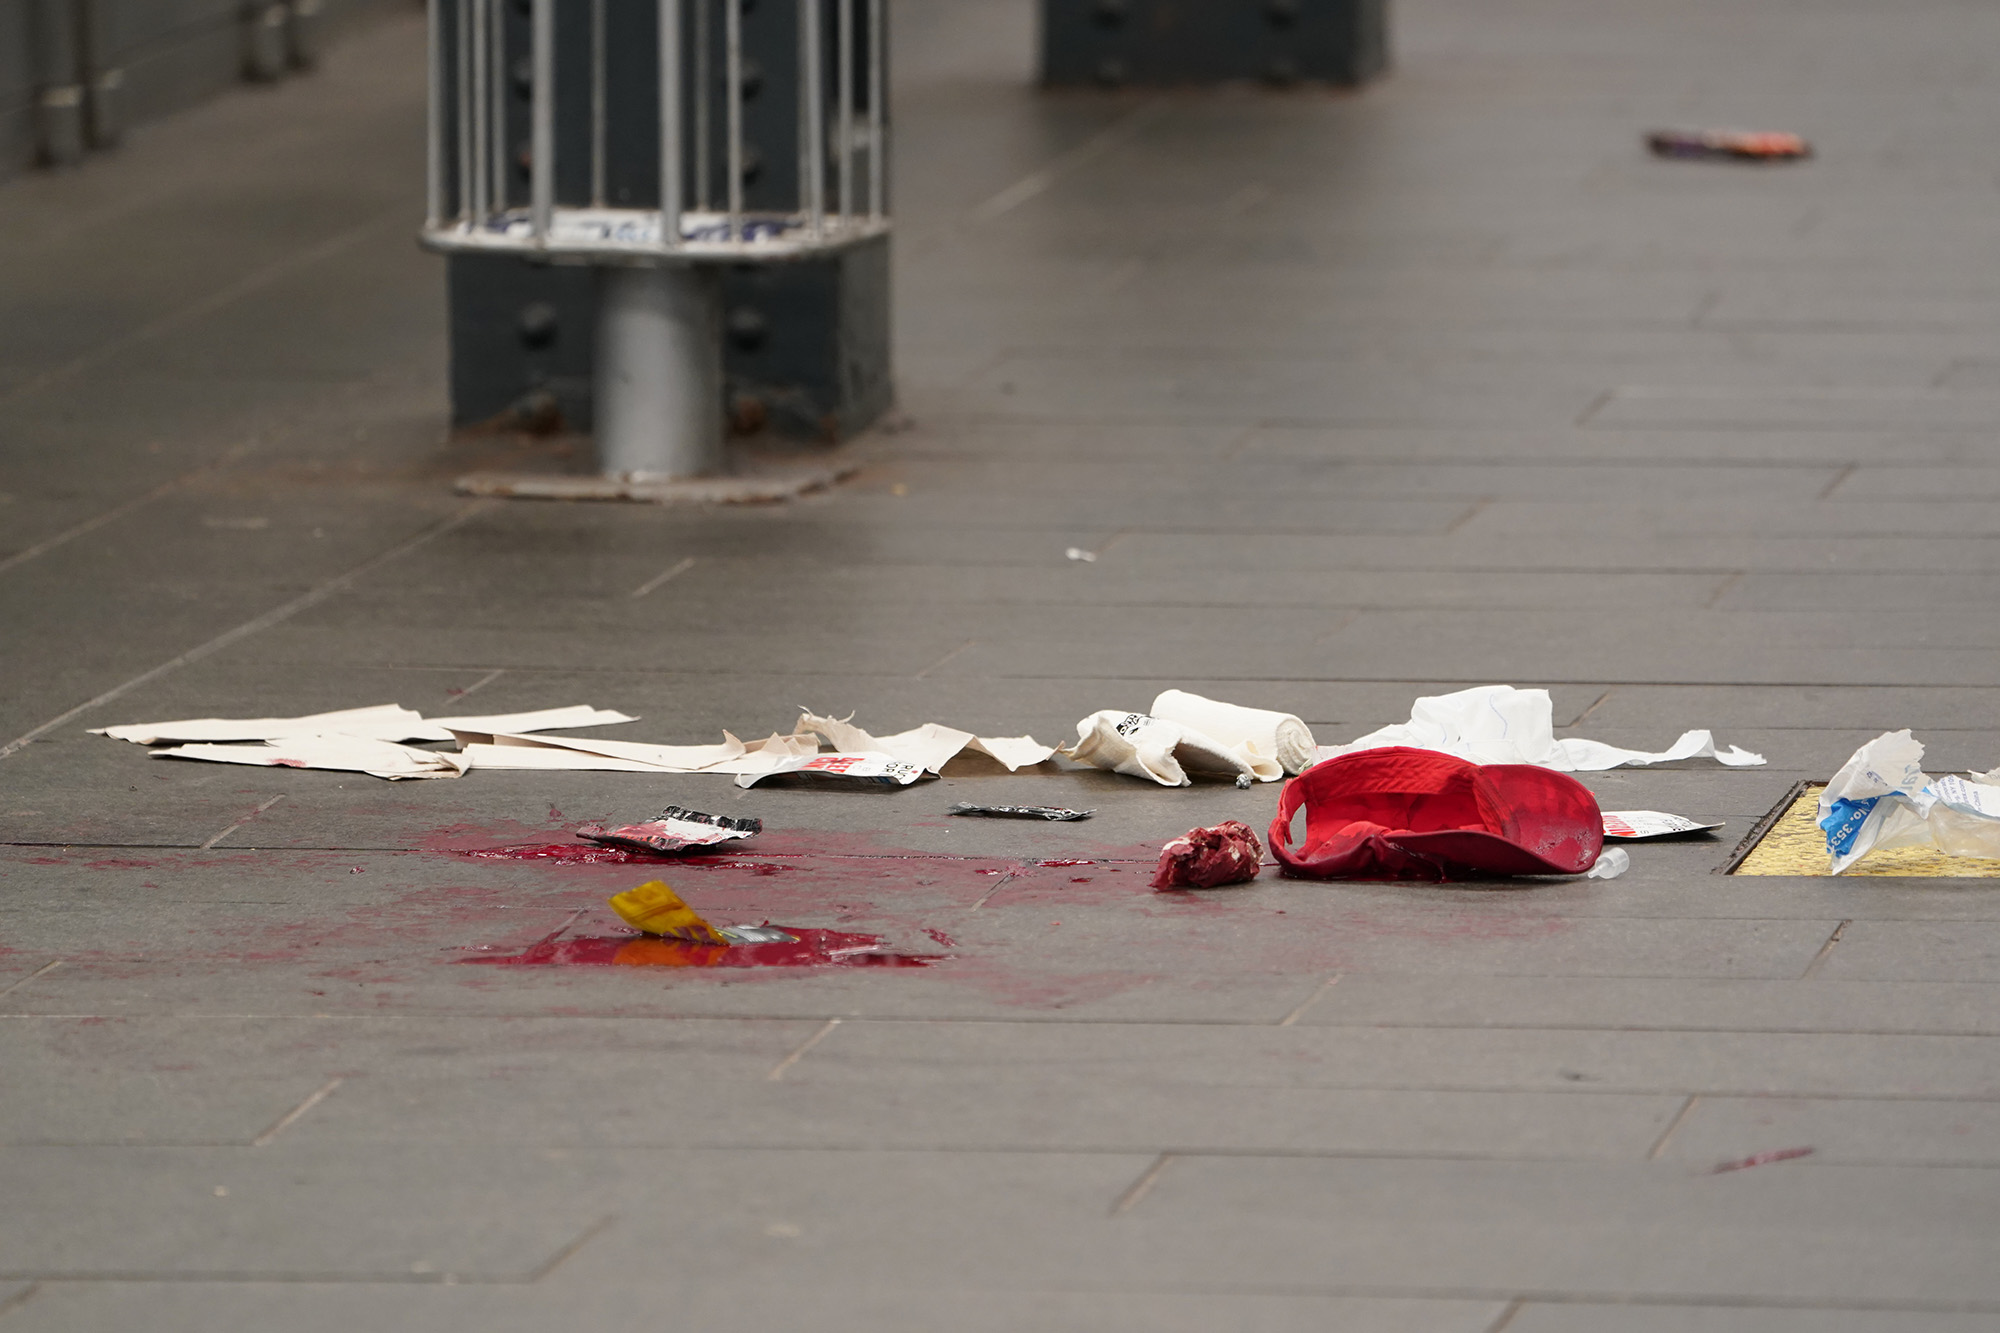 A baseball cap seen amid the blood at the scene of the stabbing.